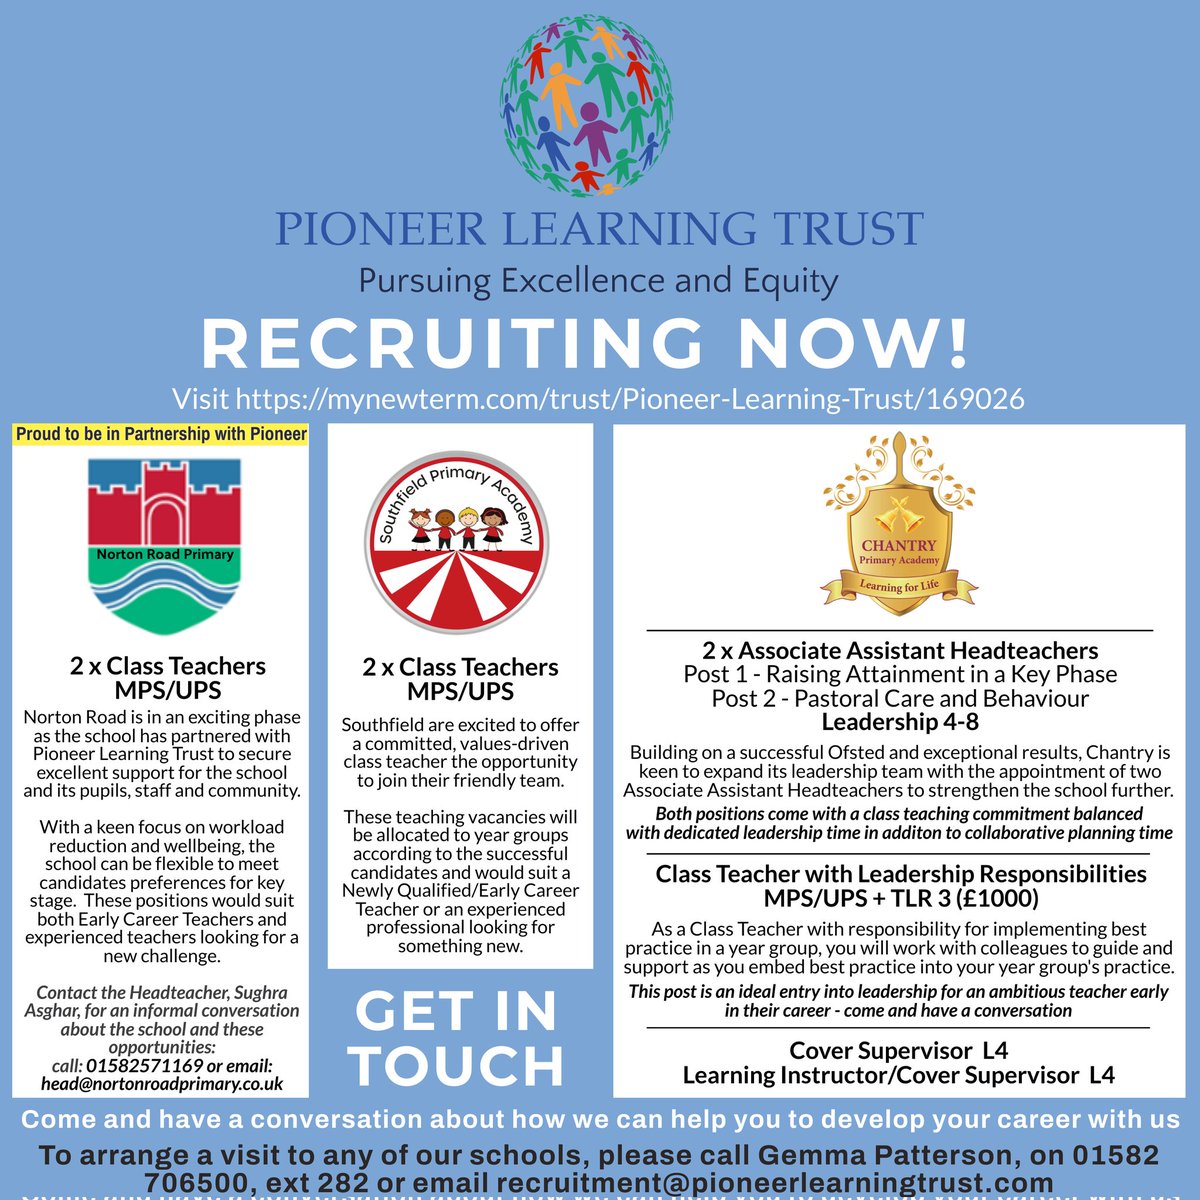 Check out this great range of posts to suit you, whatever your career stage: ✅ ECTs looking for a first job ✅ Experienced class teachers ✅ Teachers looking for their first leadership post ✅ Aspiring leaders seeking a strategic role APPLY NOW at mynewterm.com/trust/Pioneer-…